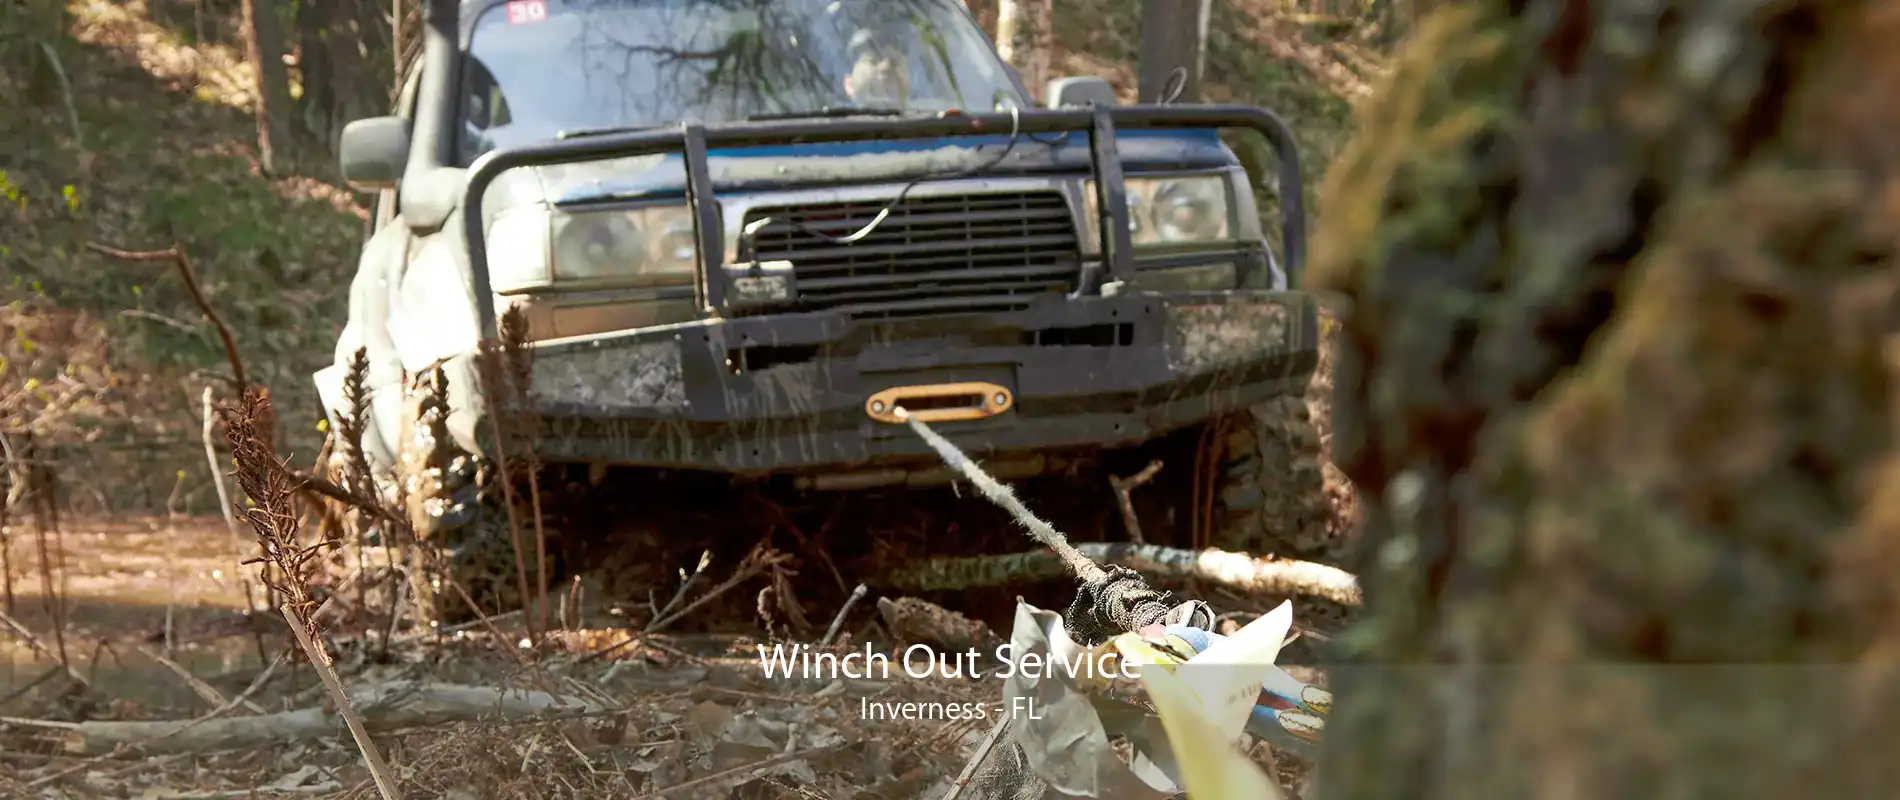 Winch Out Service Inverness - FL